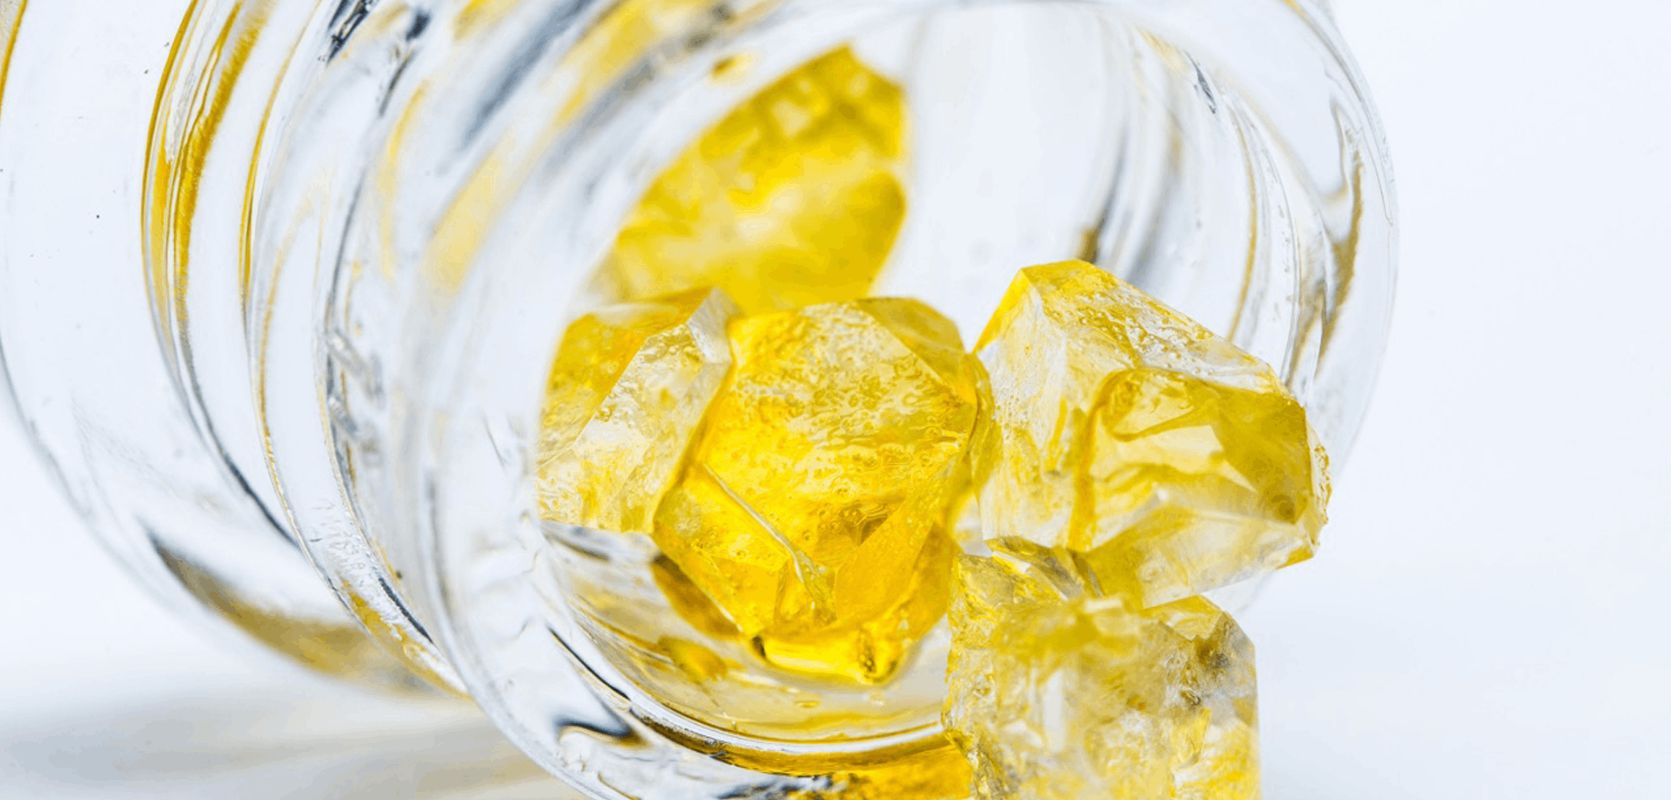 These little gems are the result of a specialized extraction process that produces a highly concentrated form of THC. So if you're looking for a powerful high, cannabis diamonds are your new best friend.